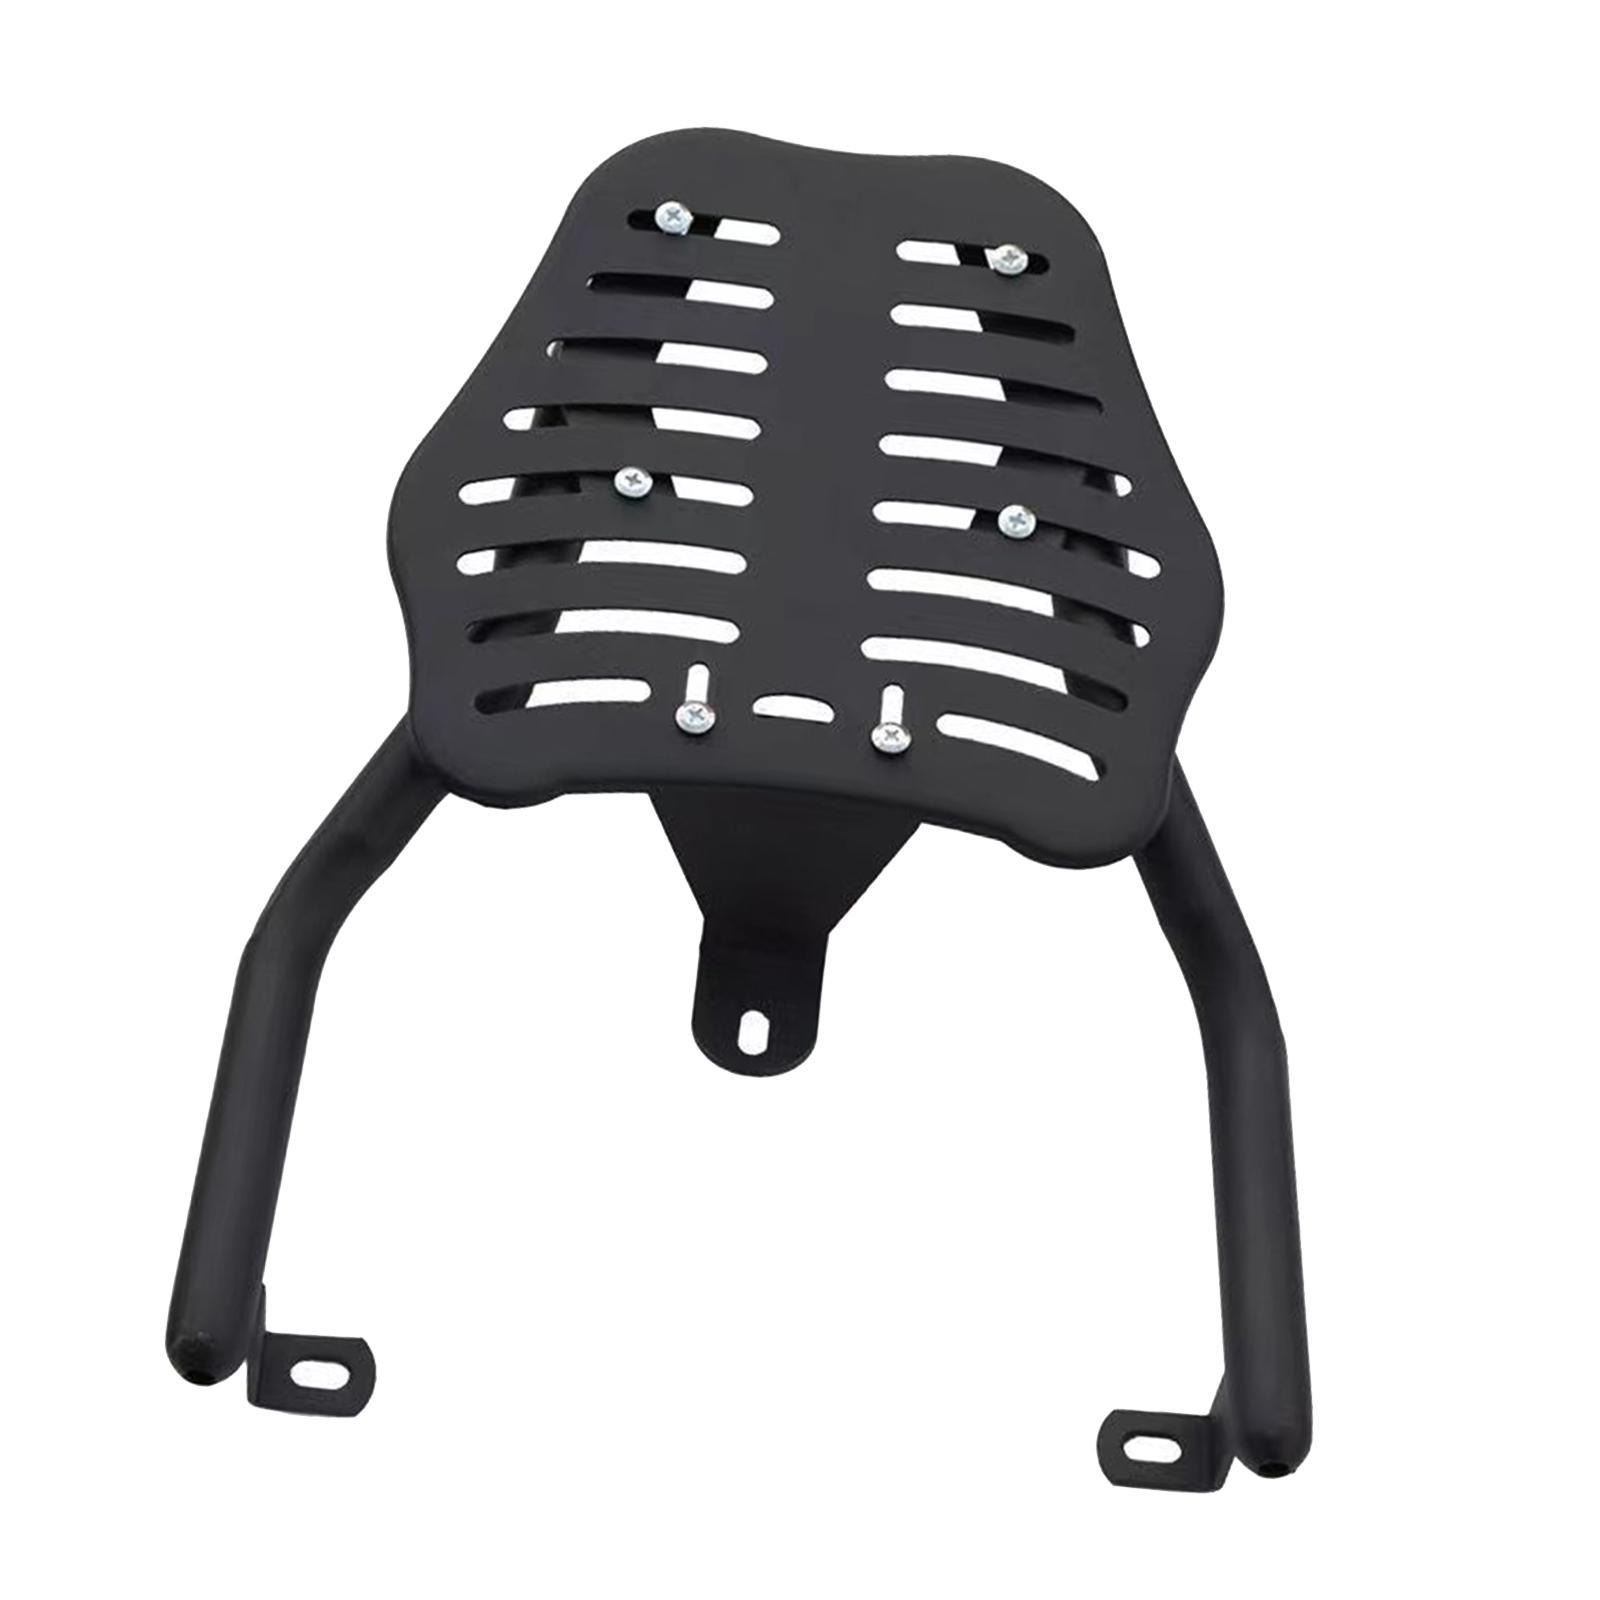 Rear Luggage Rack Carrier Iron Accessory Motorcycle Holder Seat Luggage Rack